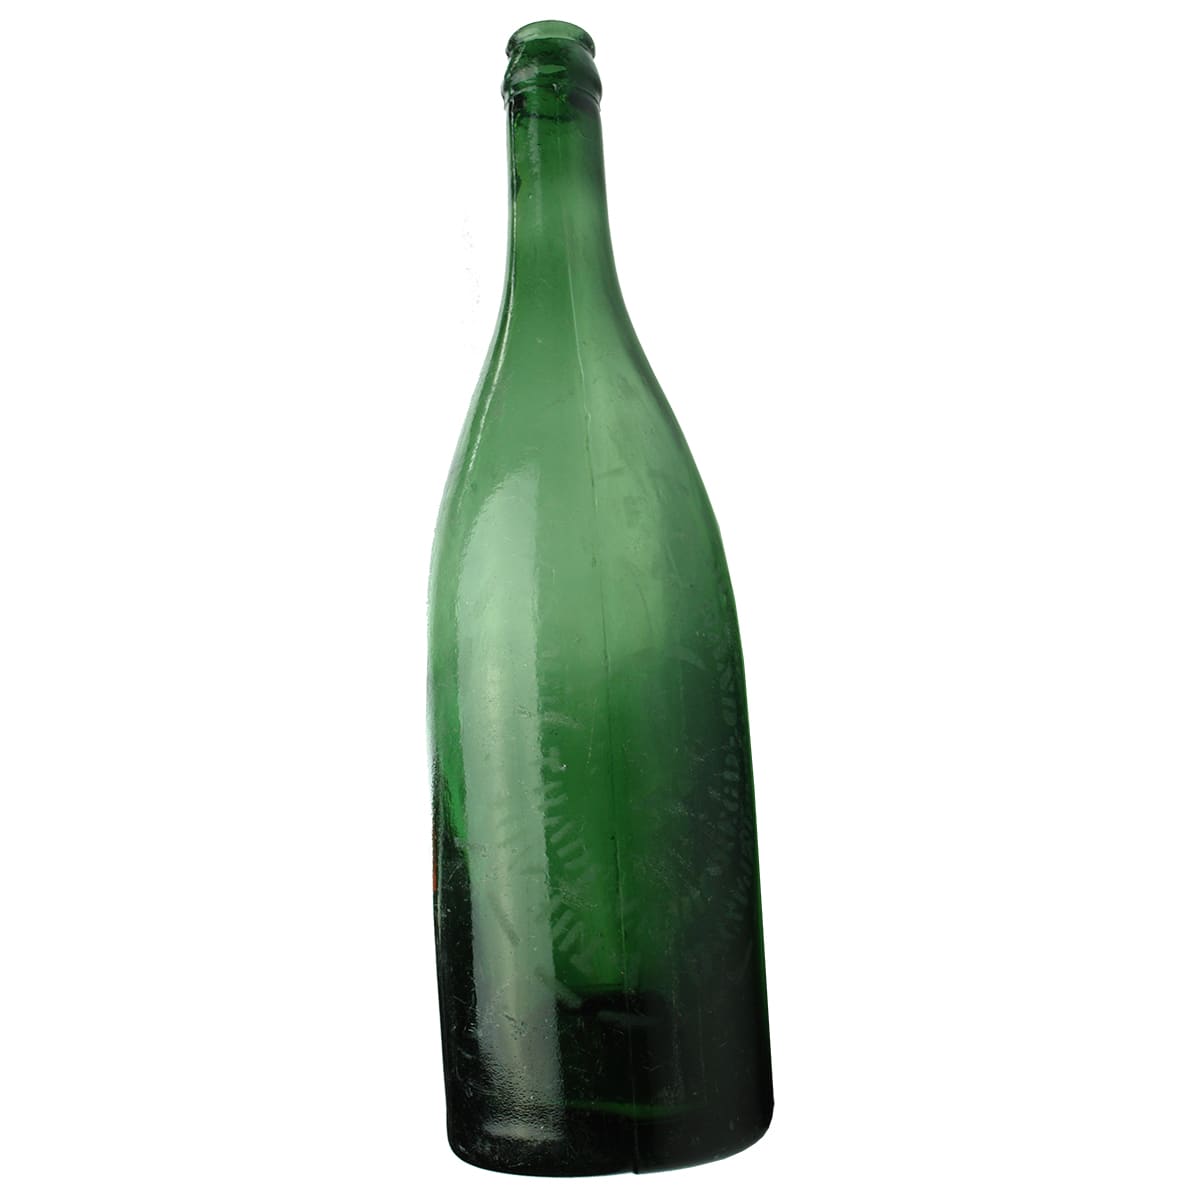 Beer. Pickaxe. The Adelaide Bottle Co-operative Company Ltd. Crown Seal. Green. Sand blasted. Oval badge. 26 oz. (South Australia)